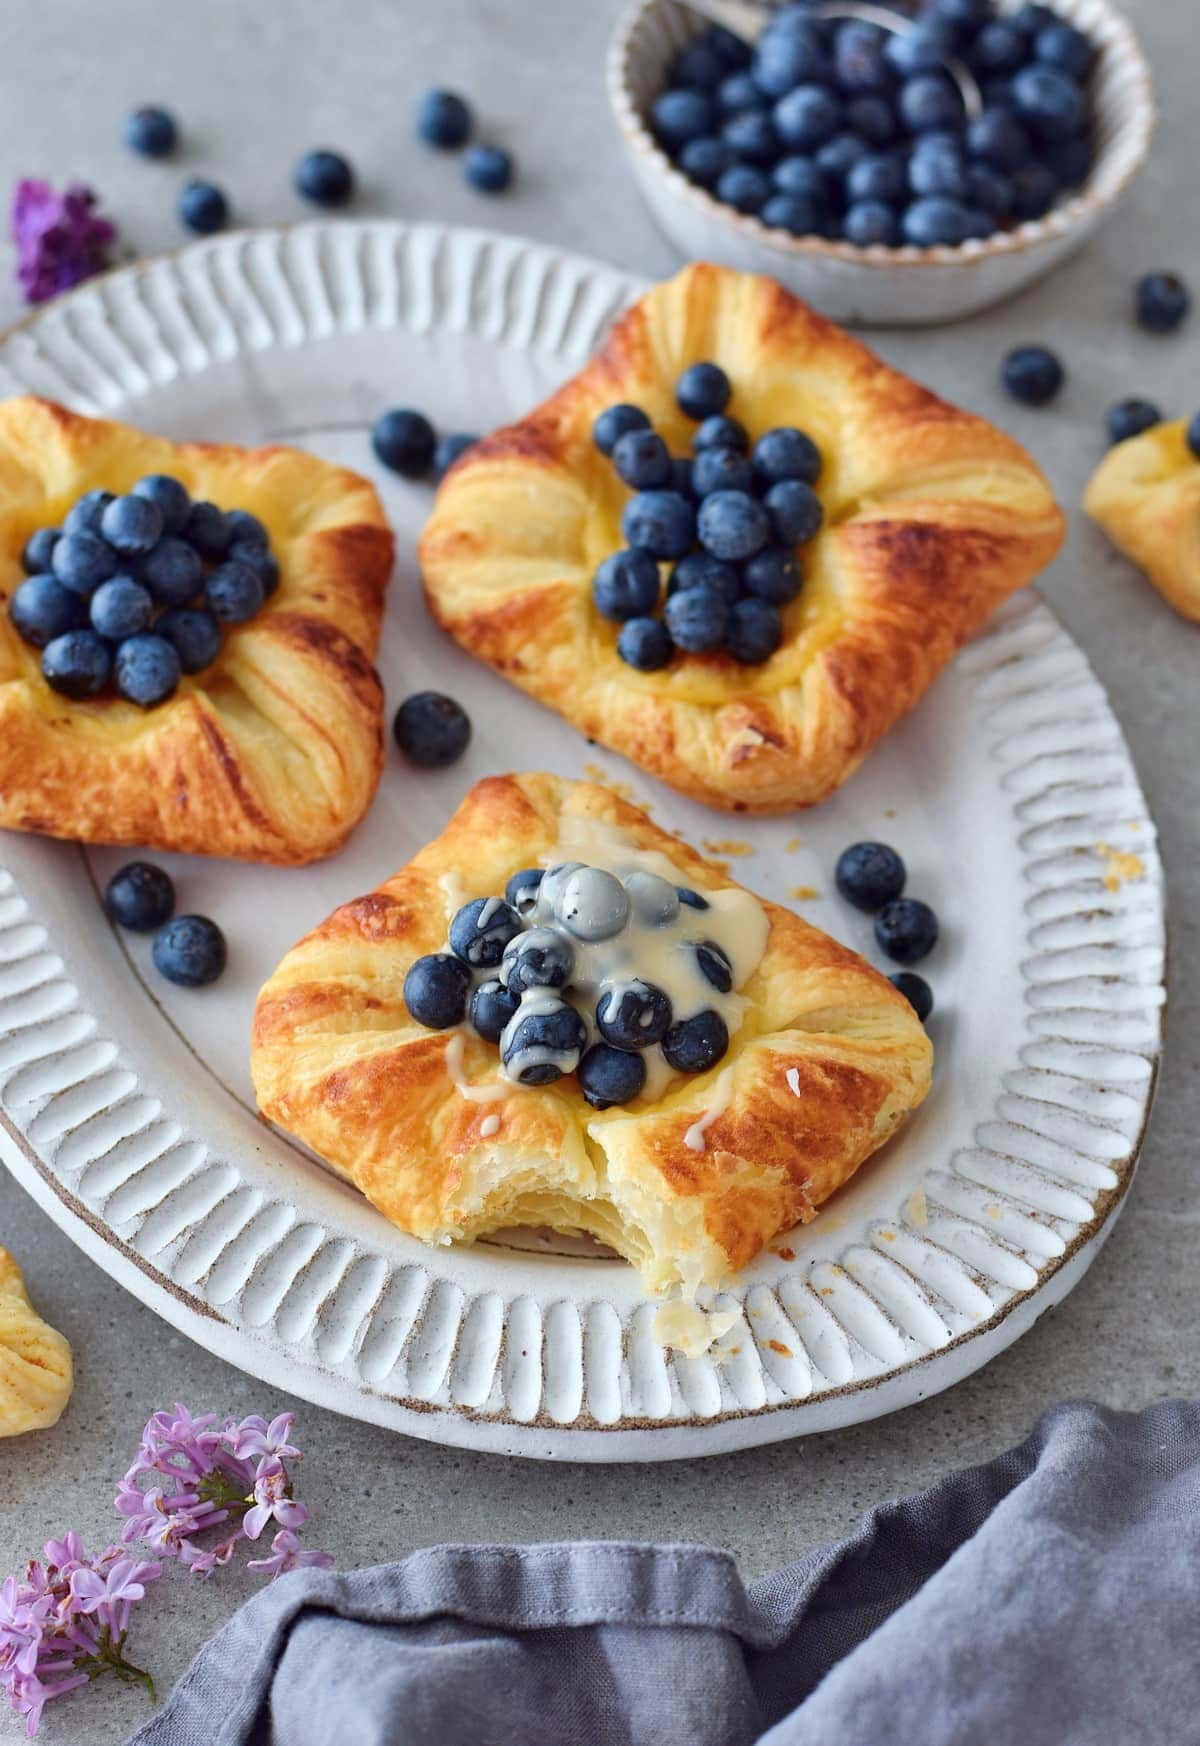 Danish pastry with cashew butter on plate with blueberries